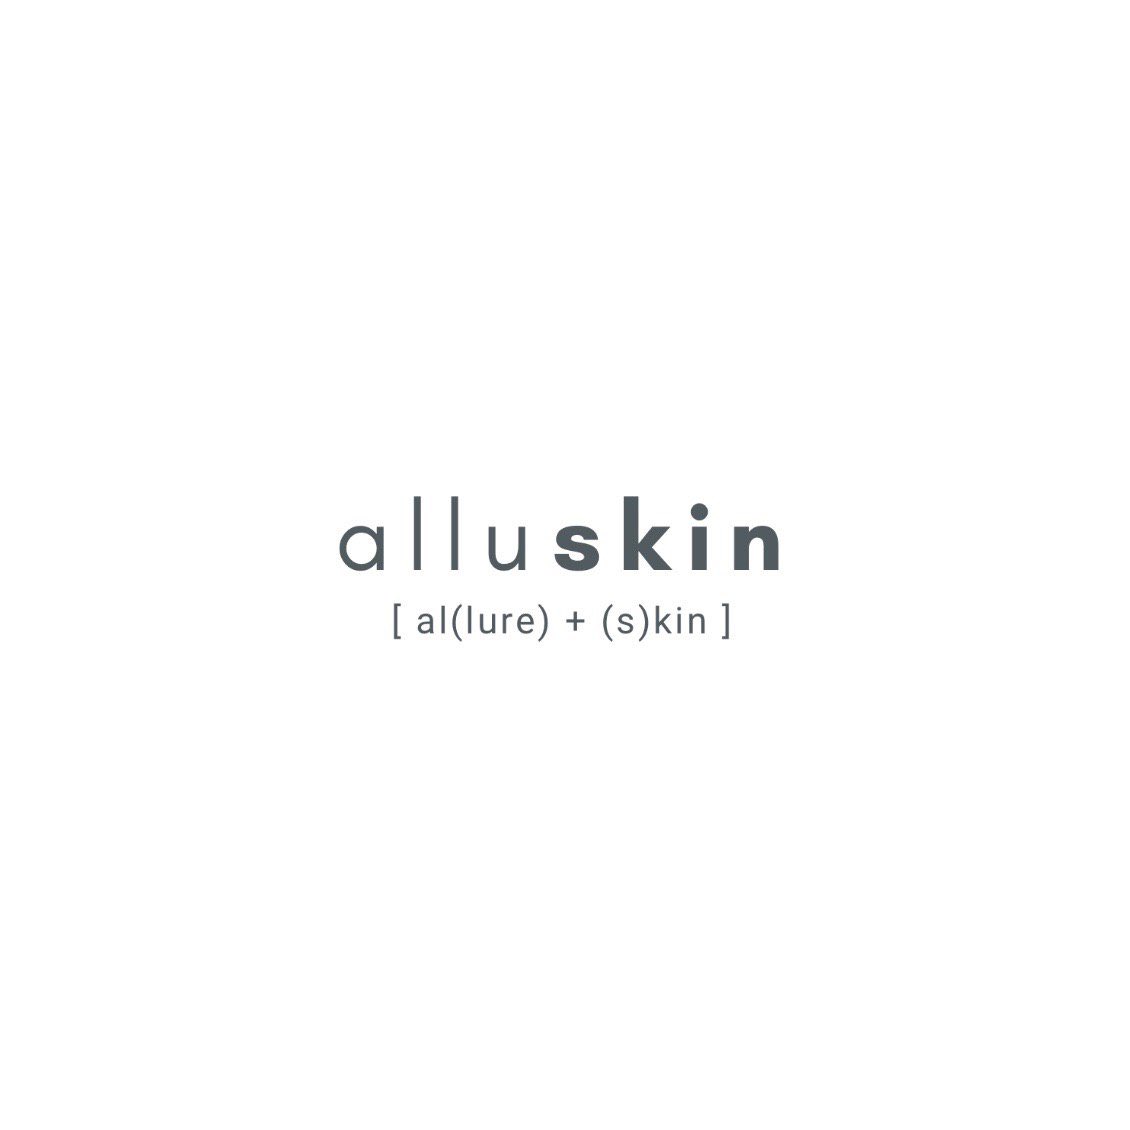 Alluskin stand for: